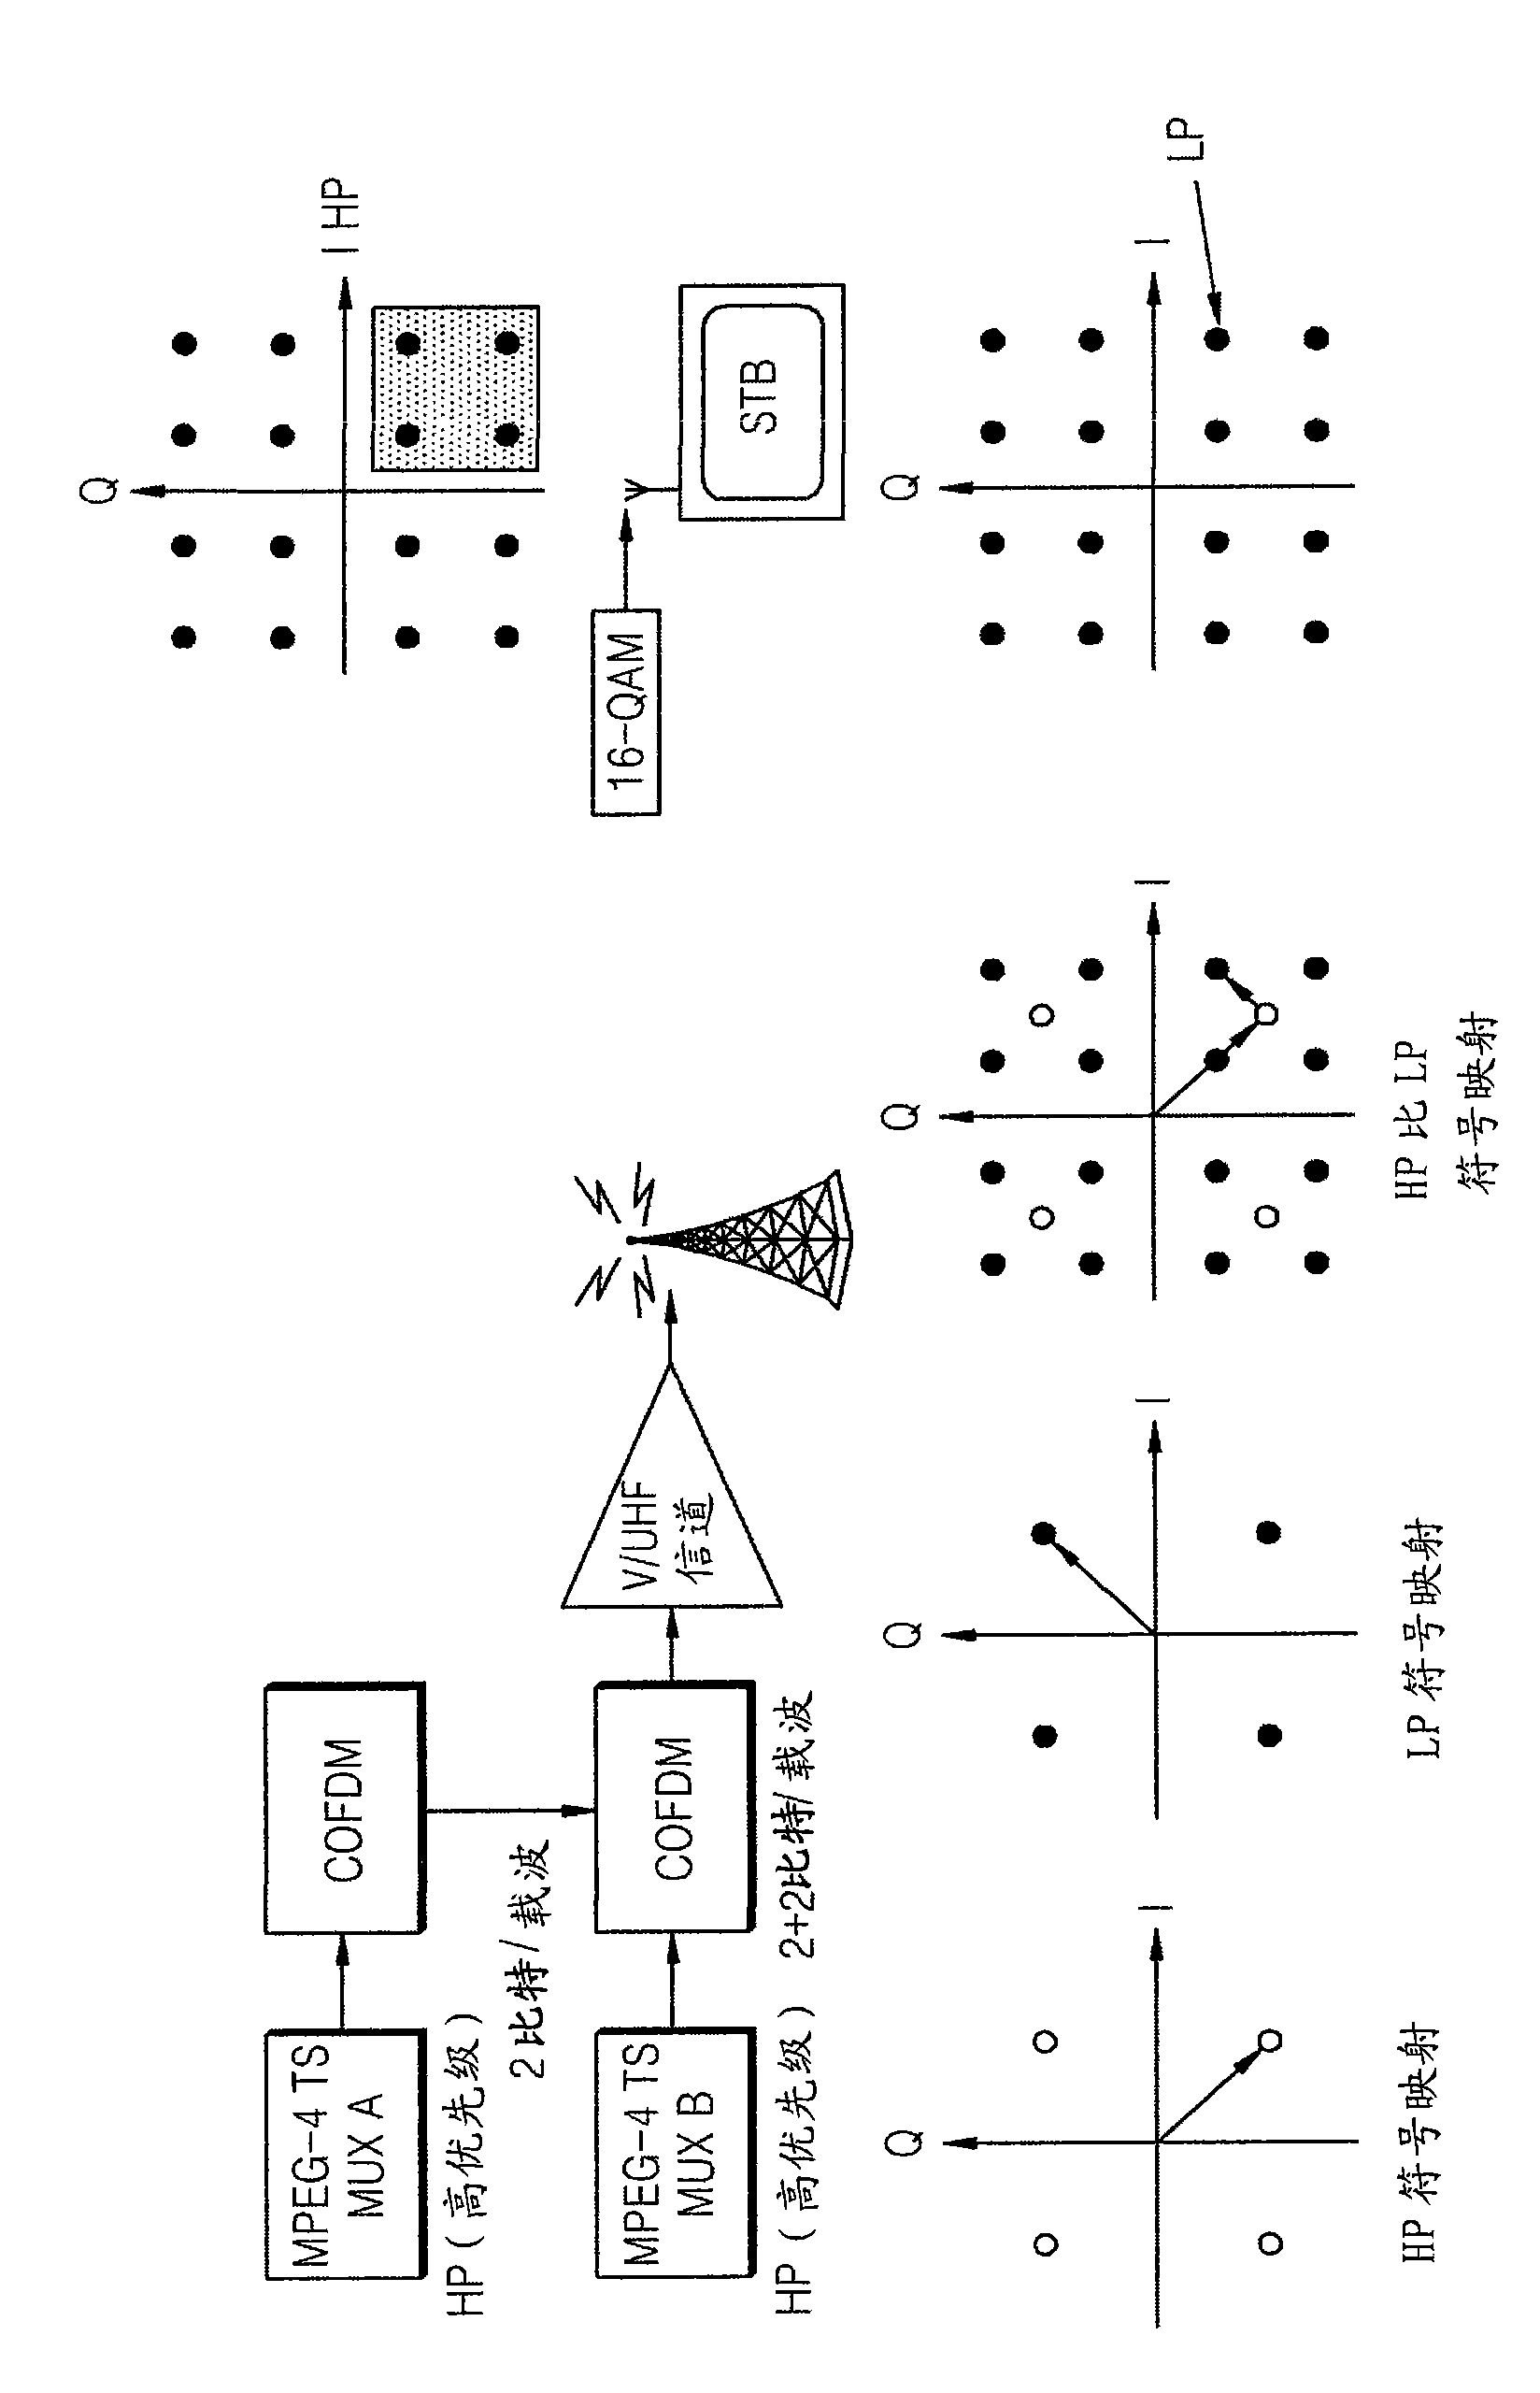 Apparatus and method for hierarchical modulation transmission and reception of scalable video bitstream